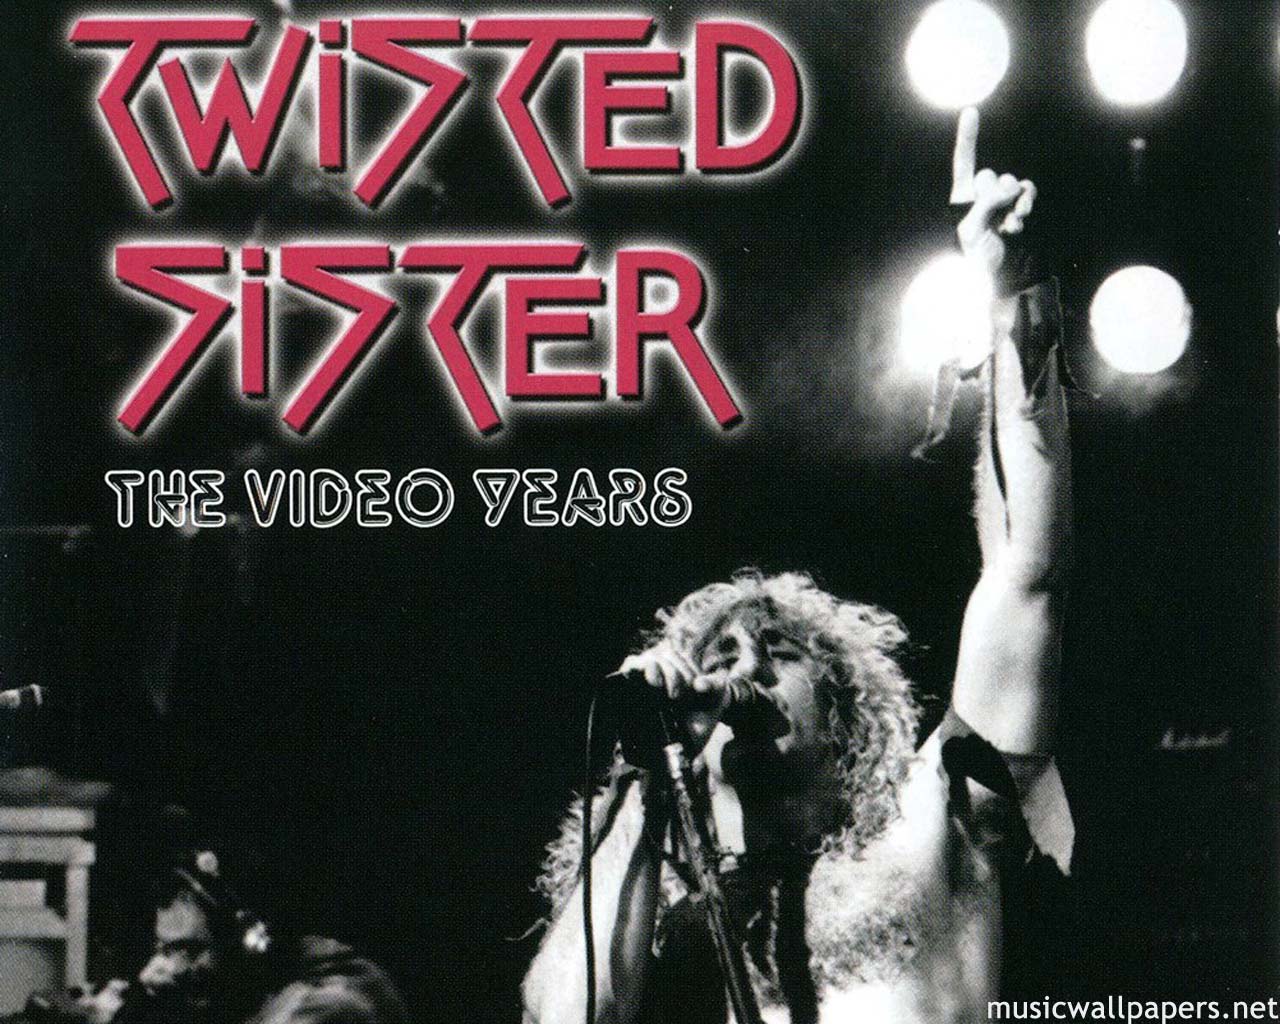 Twisted Sister wallpaper, picture, photo, image